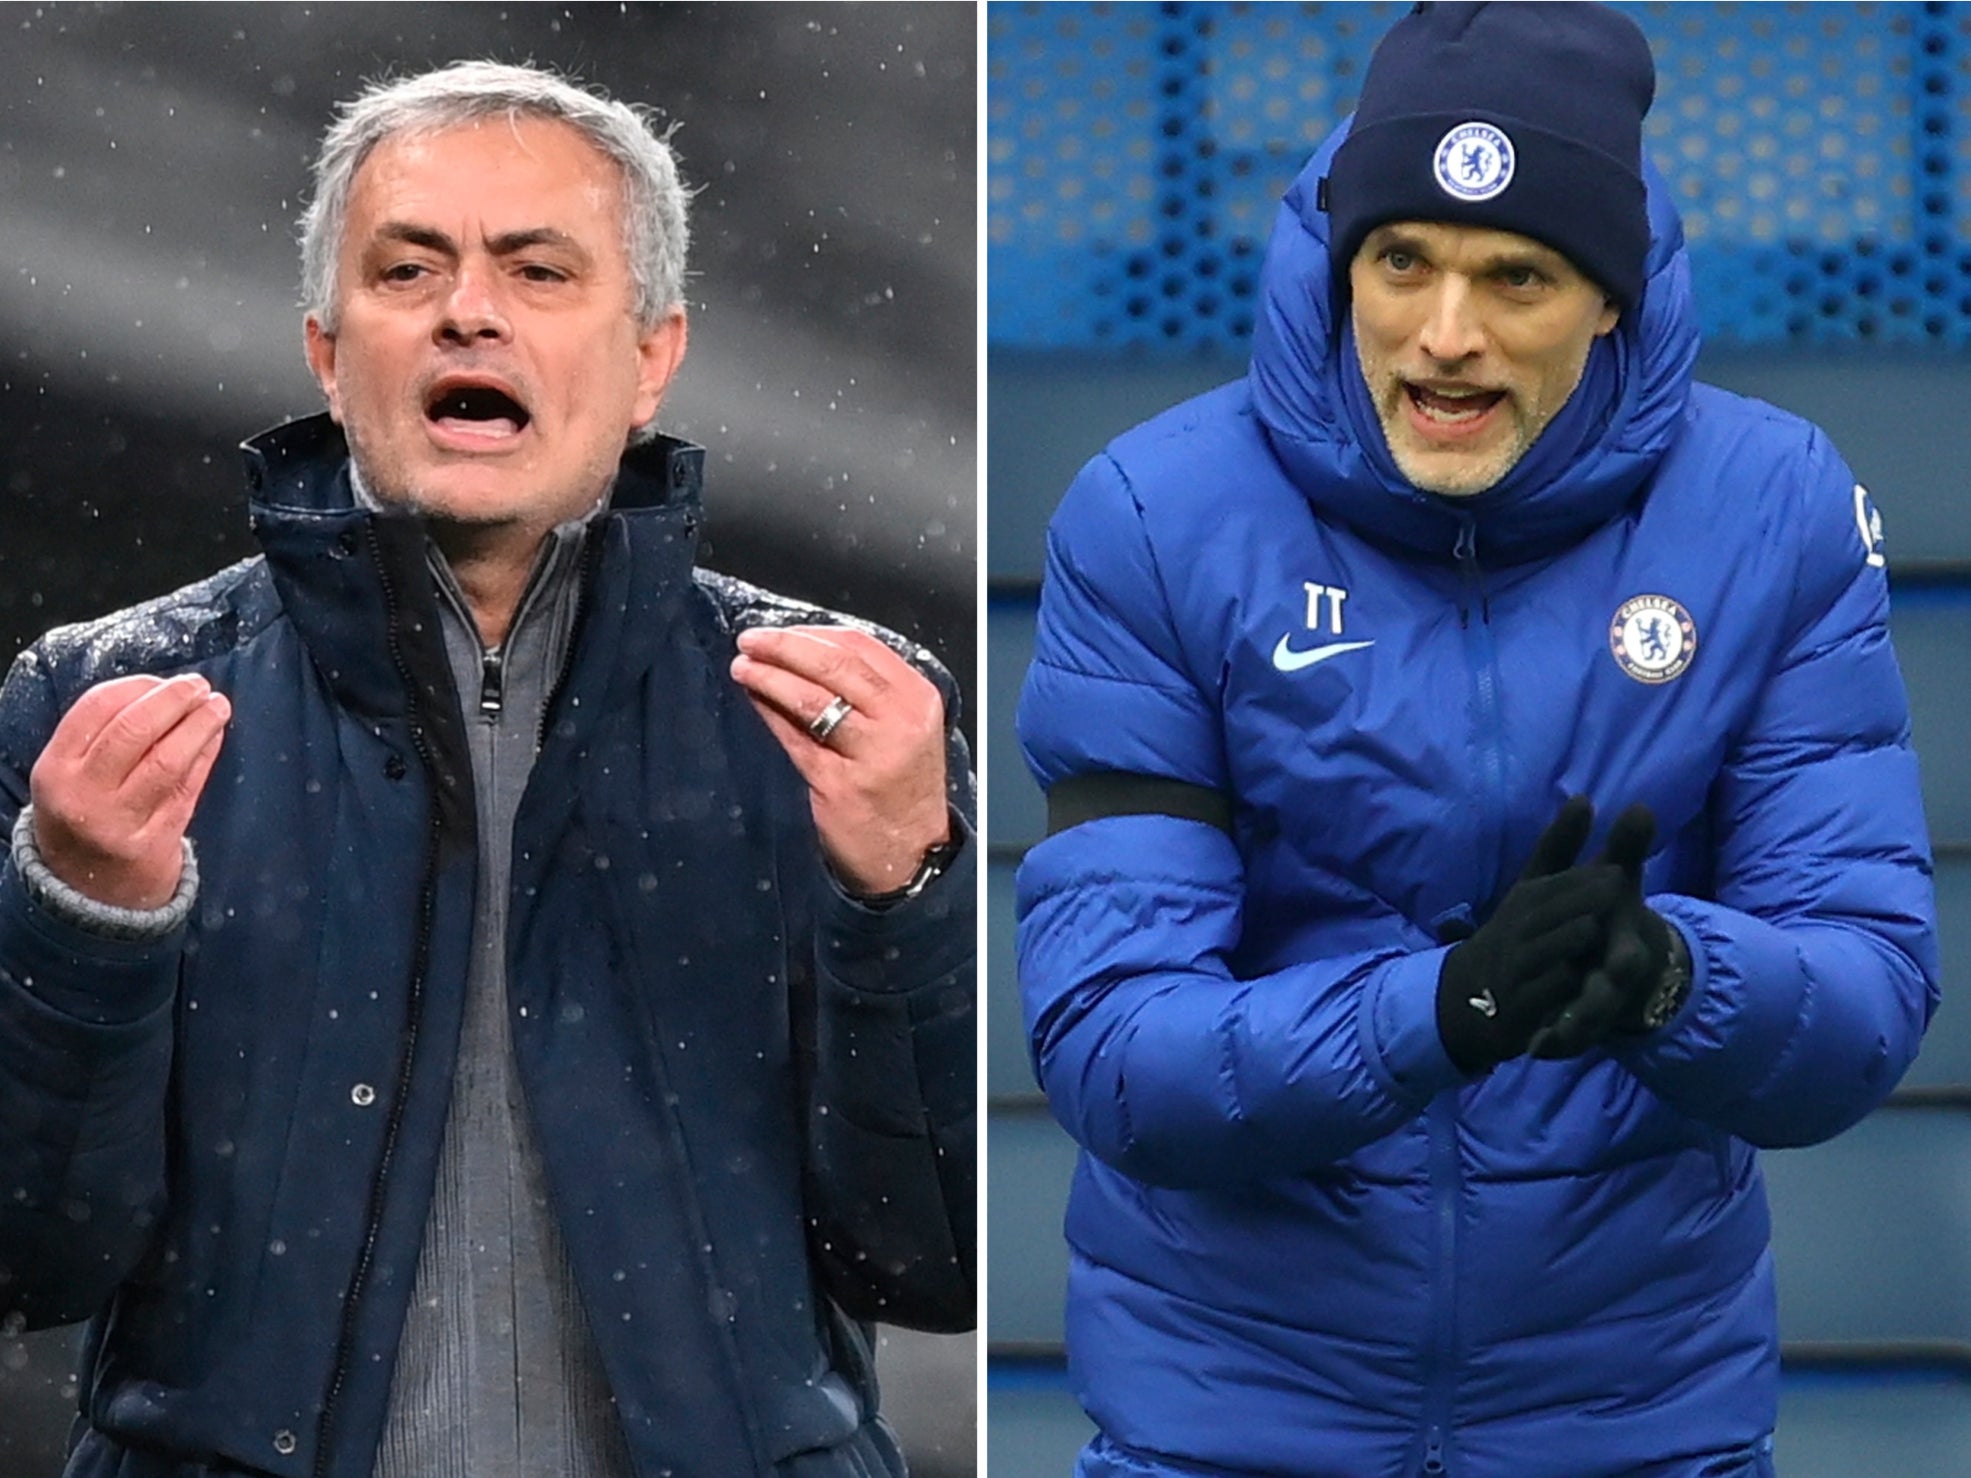 Jose Mourinho and Thomas Tuchel go head to head in the London derby